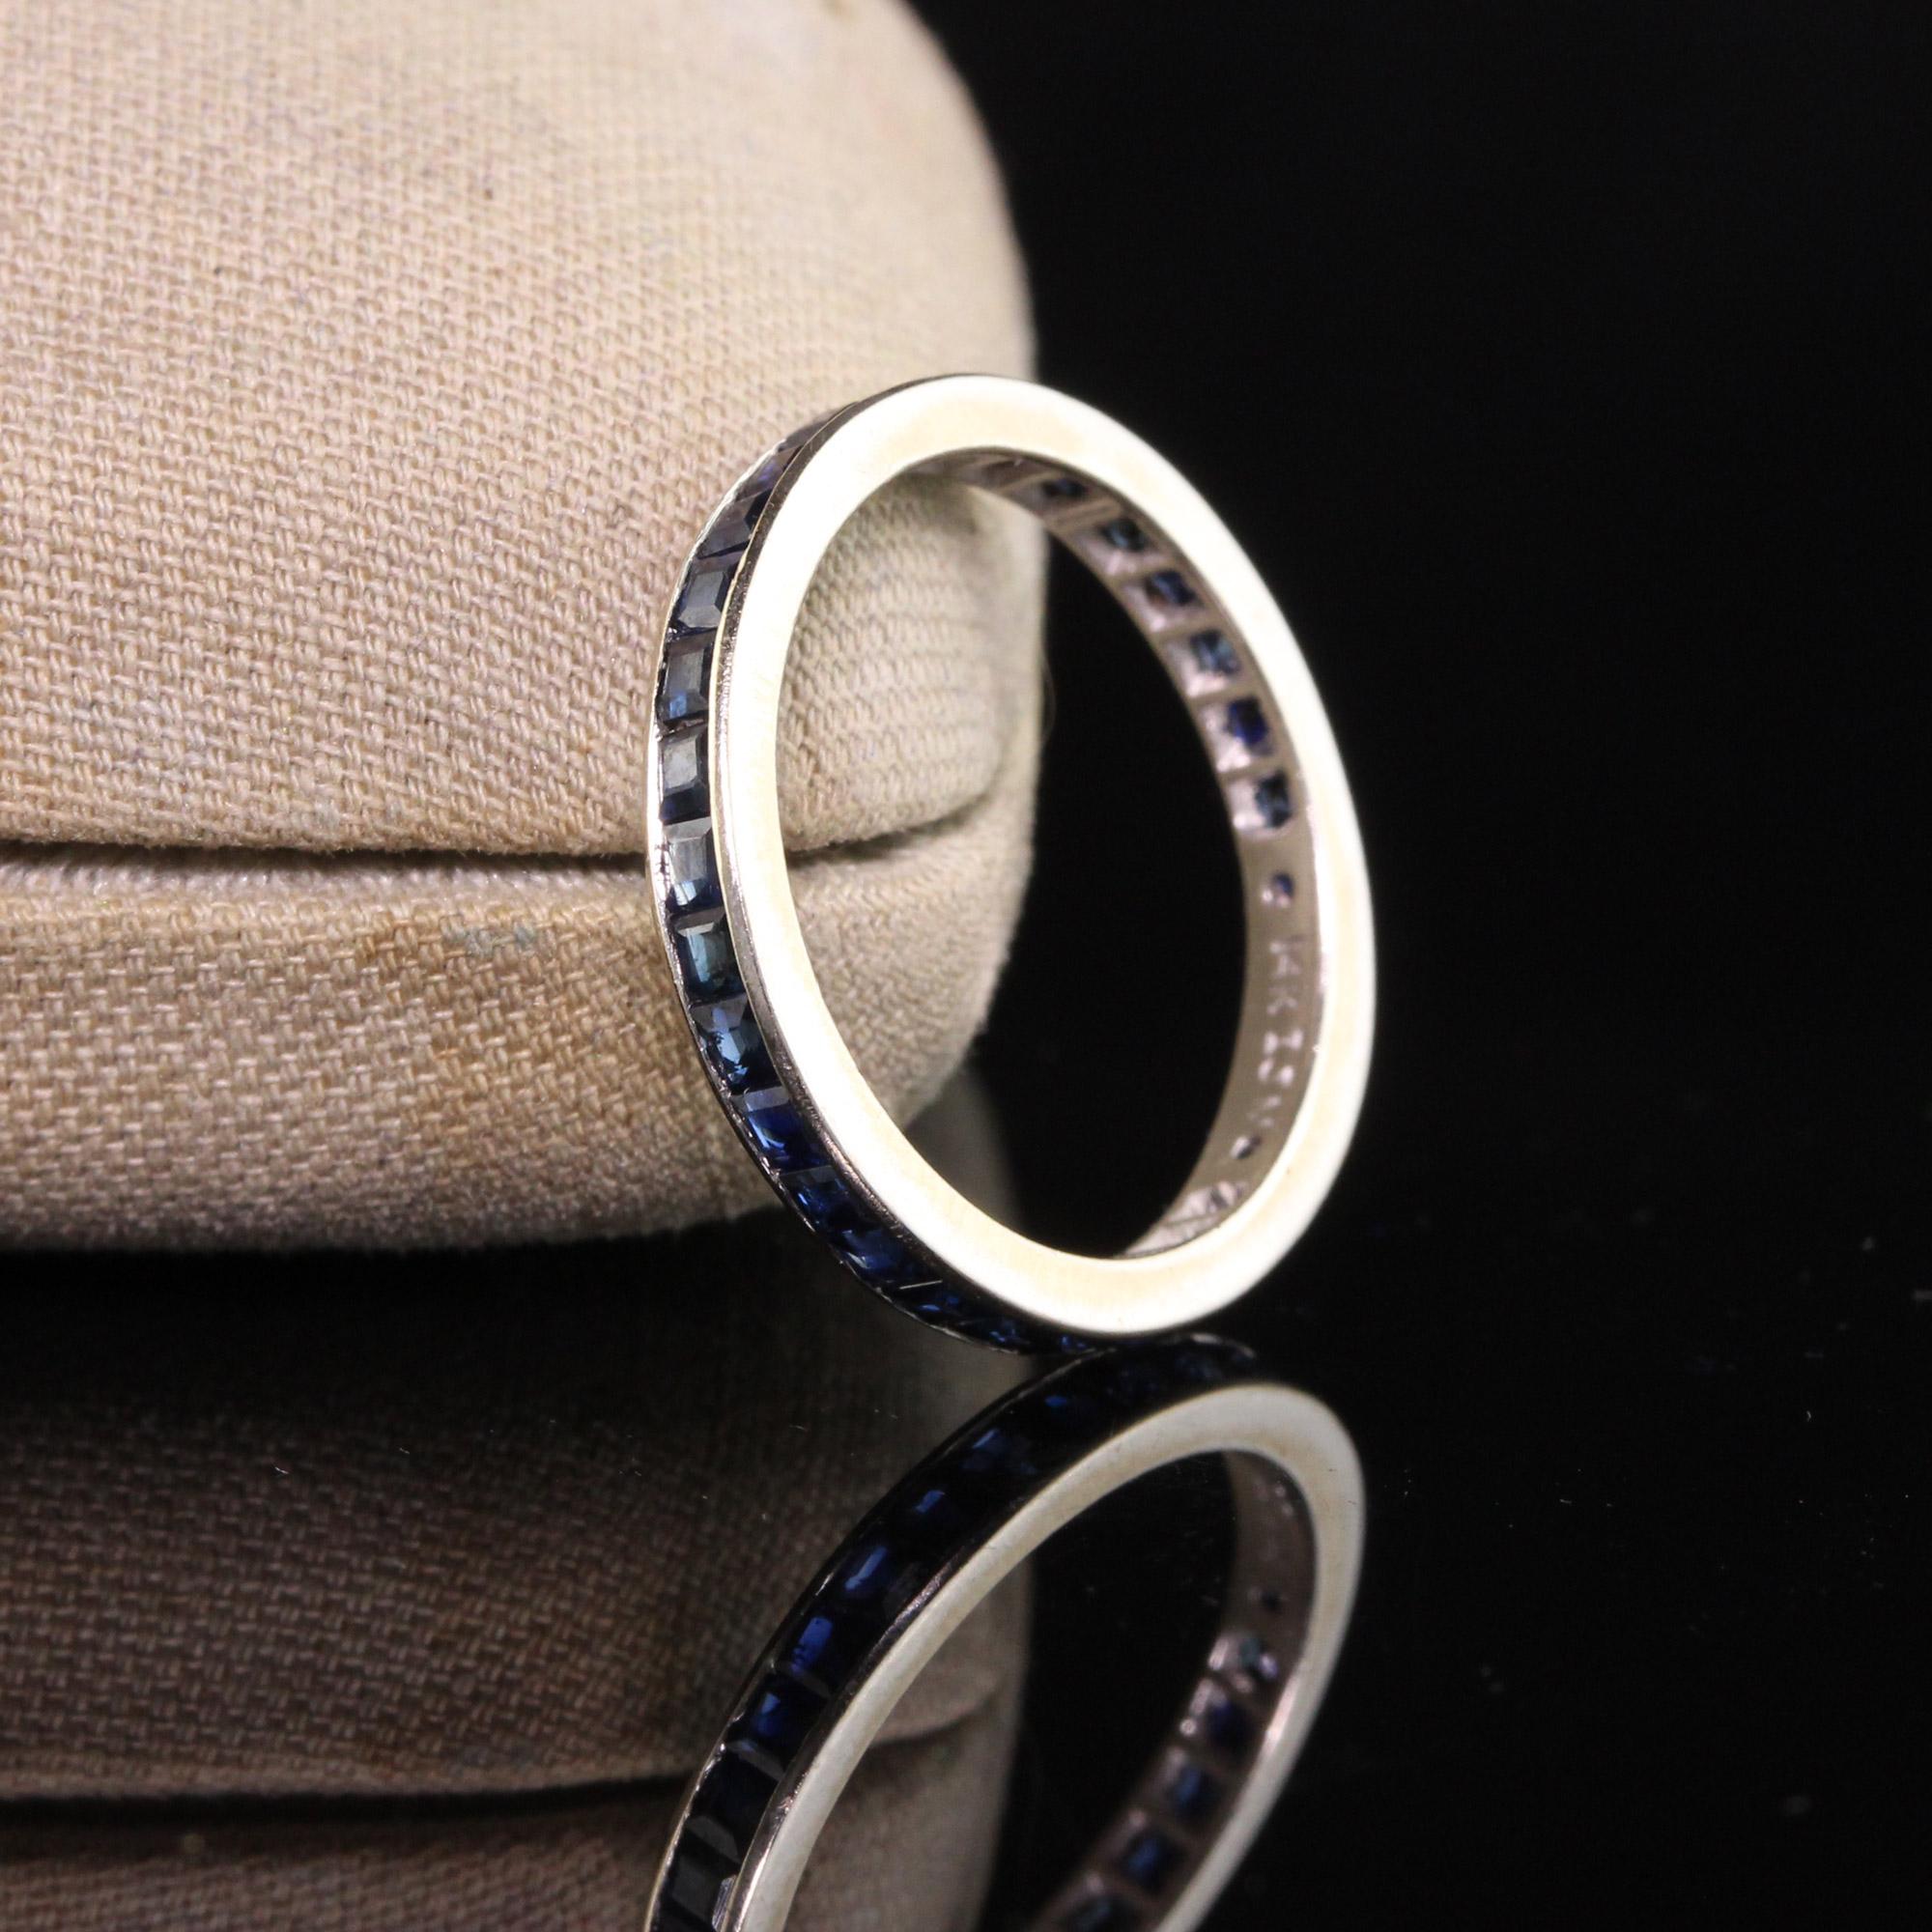 Vintage Estate 14k White Gold Square Cut Sapphire Eternity Wedding Band In Good Condition For Sale In Great Neck, NY